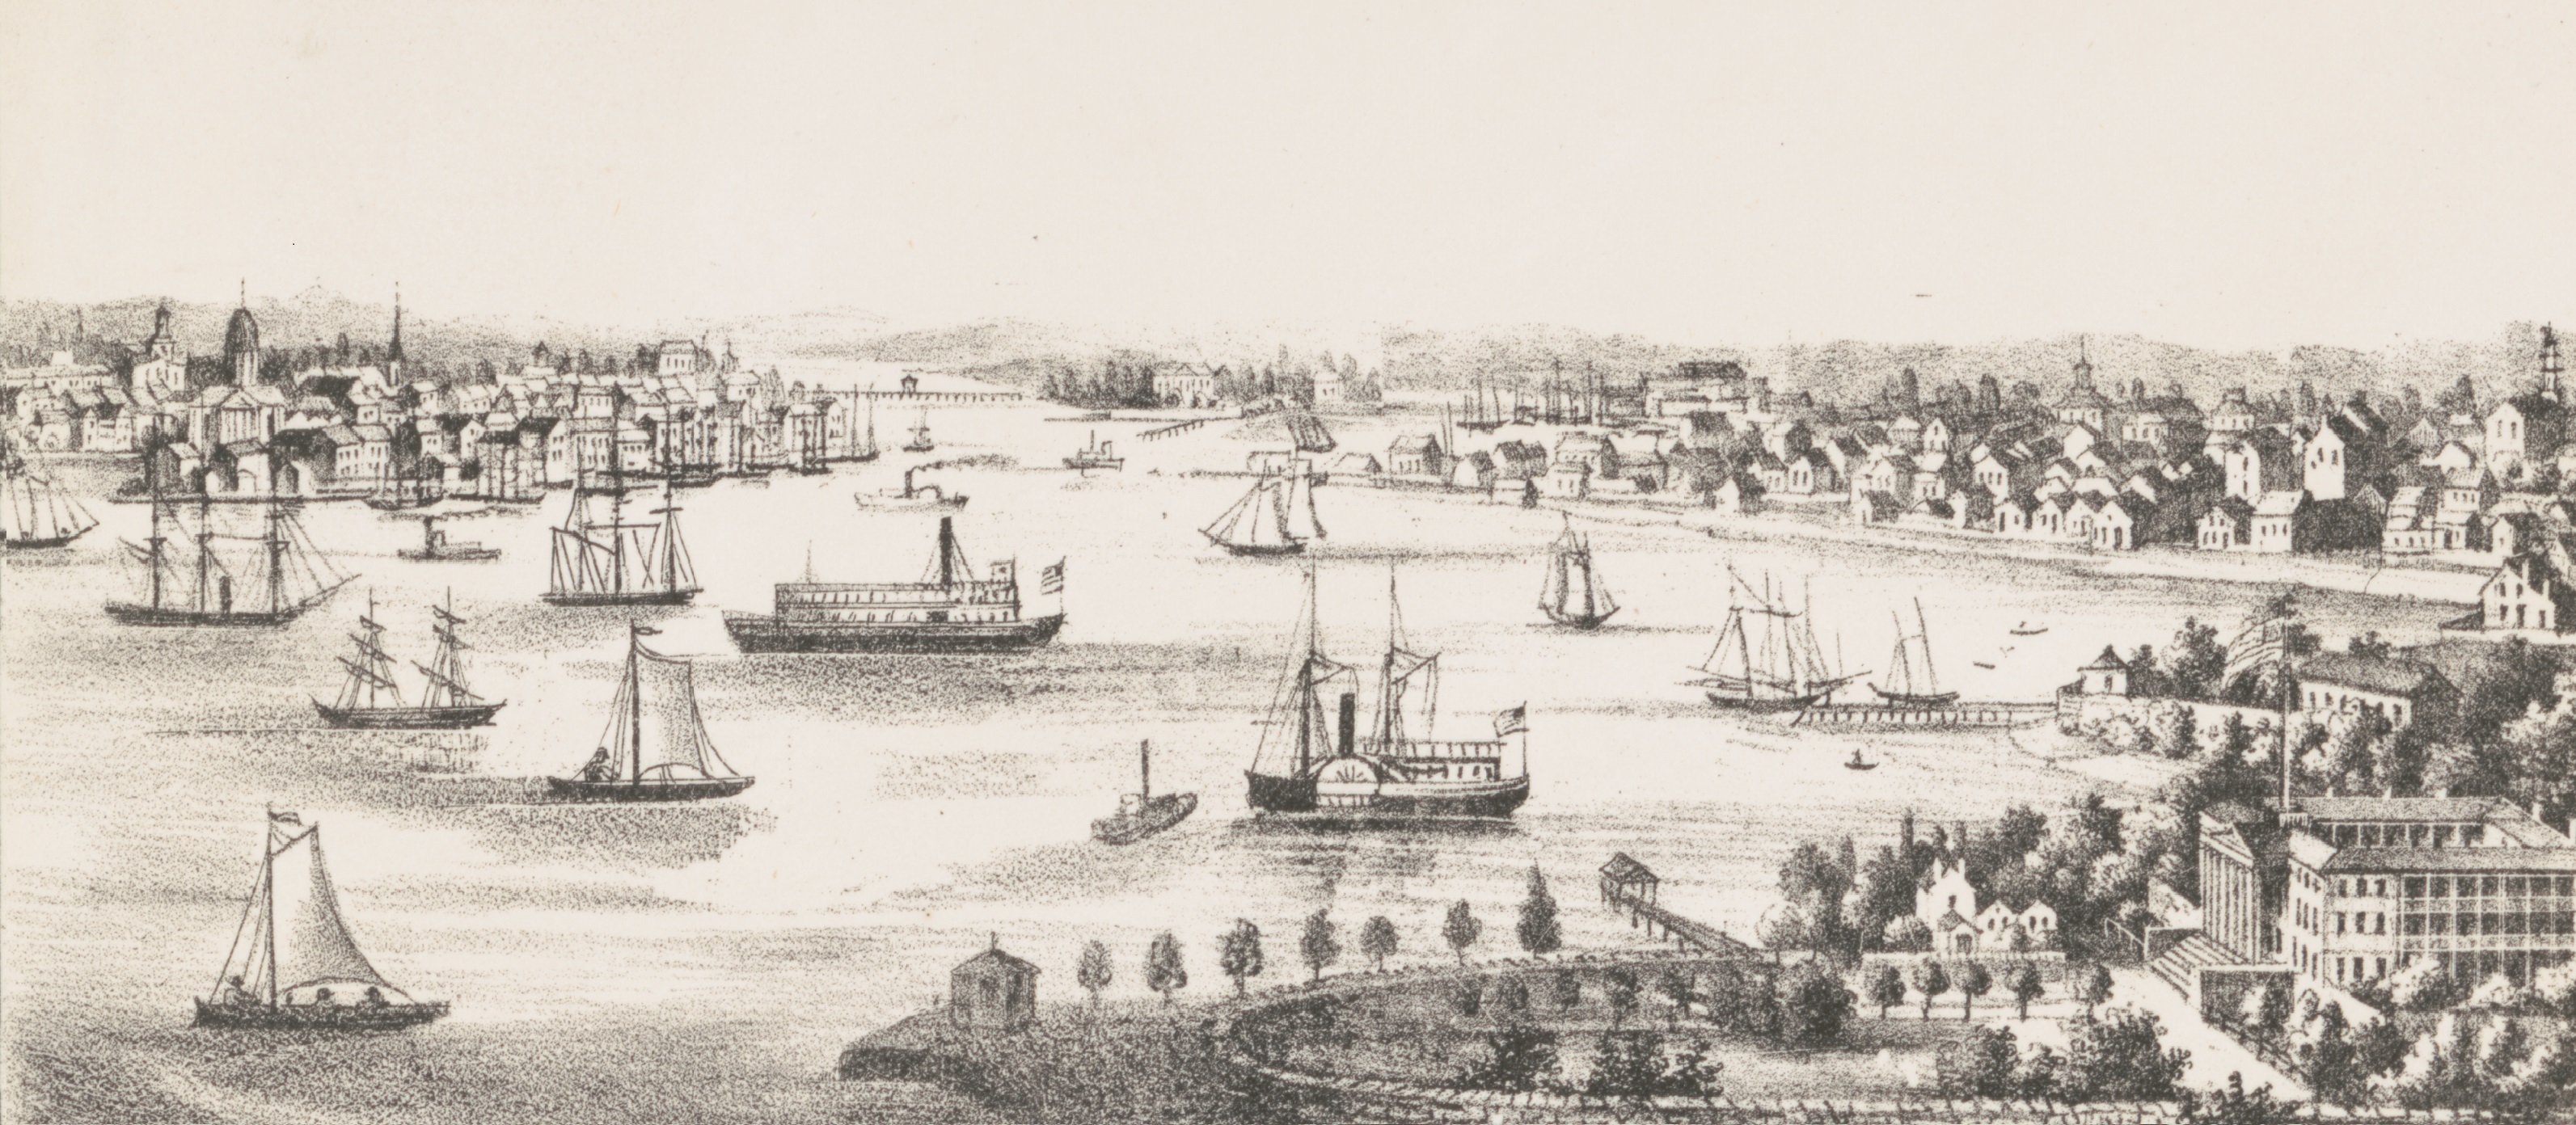 Black and white drawing of Norfolk, Virginia harbor. Various ships are sailing across the water with buildings lining the coastlines.